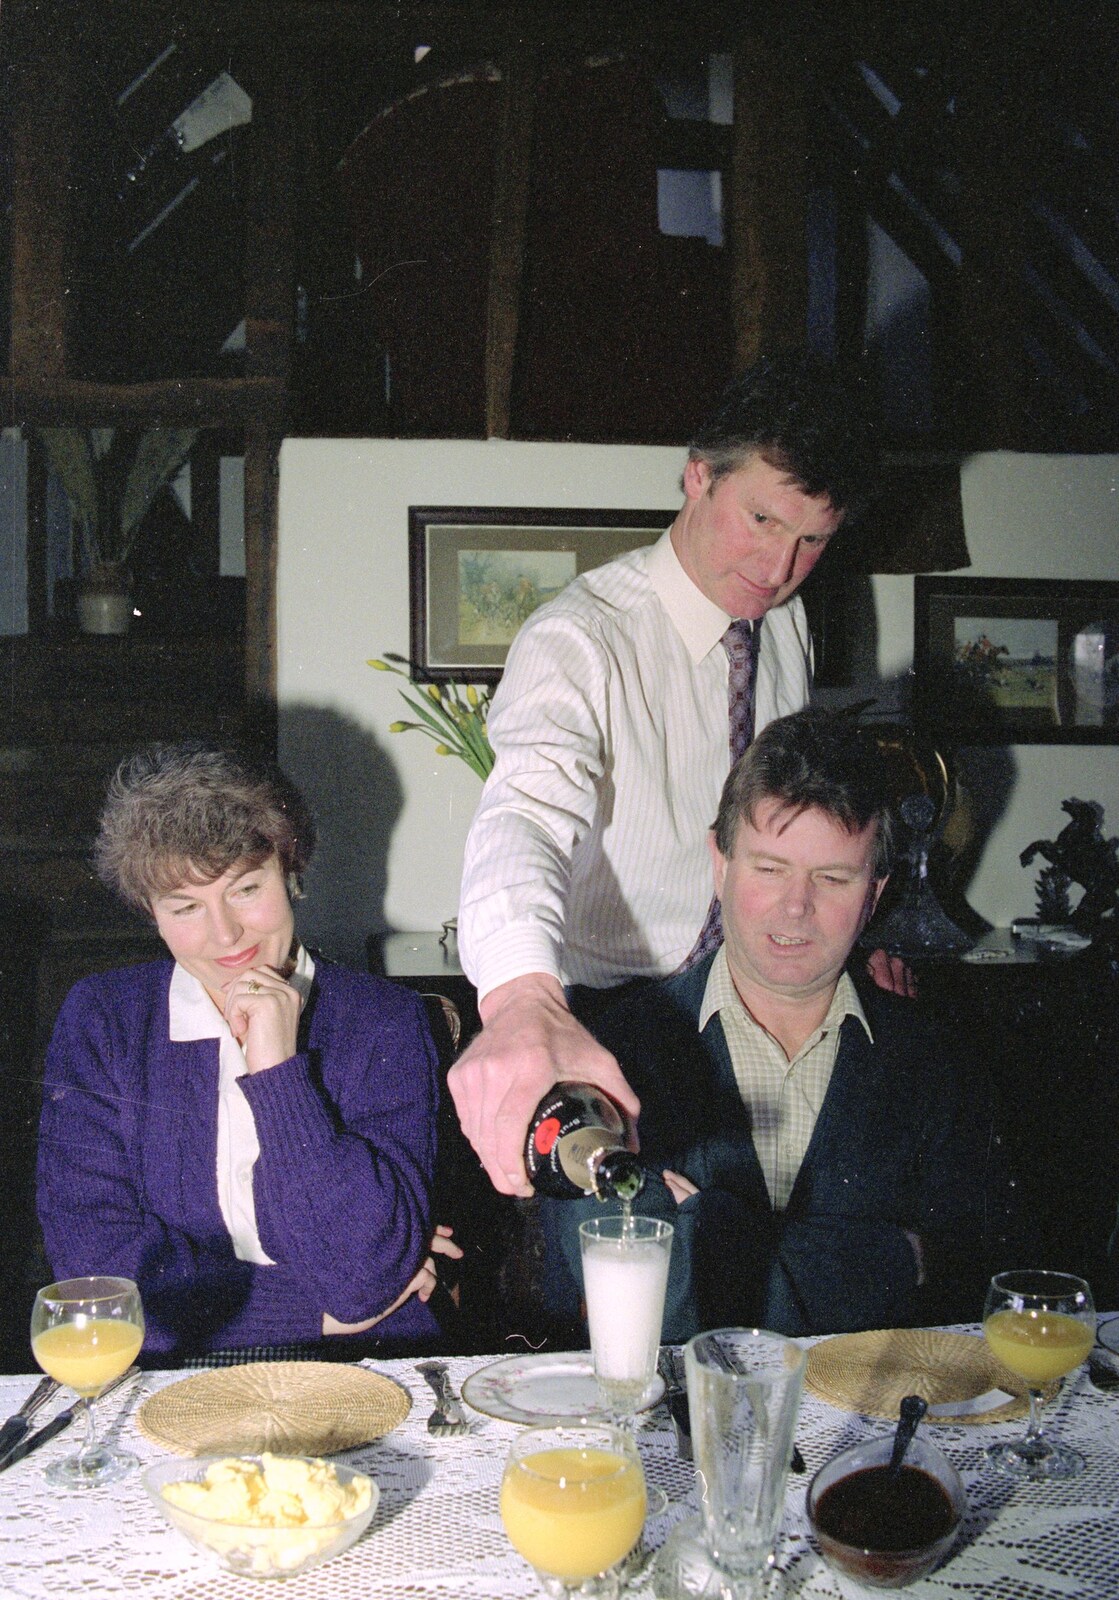 Geoff pours from Dinner Round Geoff and Brenda's, and Hamish Visits, Stuston, Suffolk - 6th April 1992